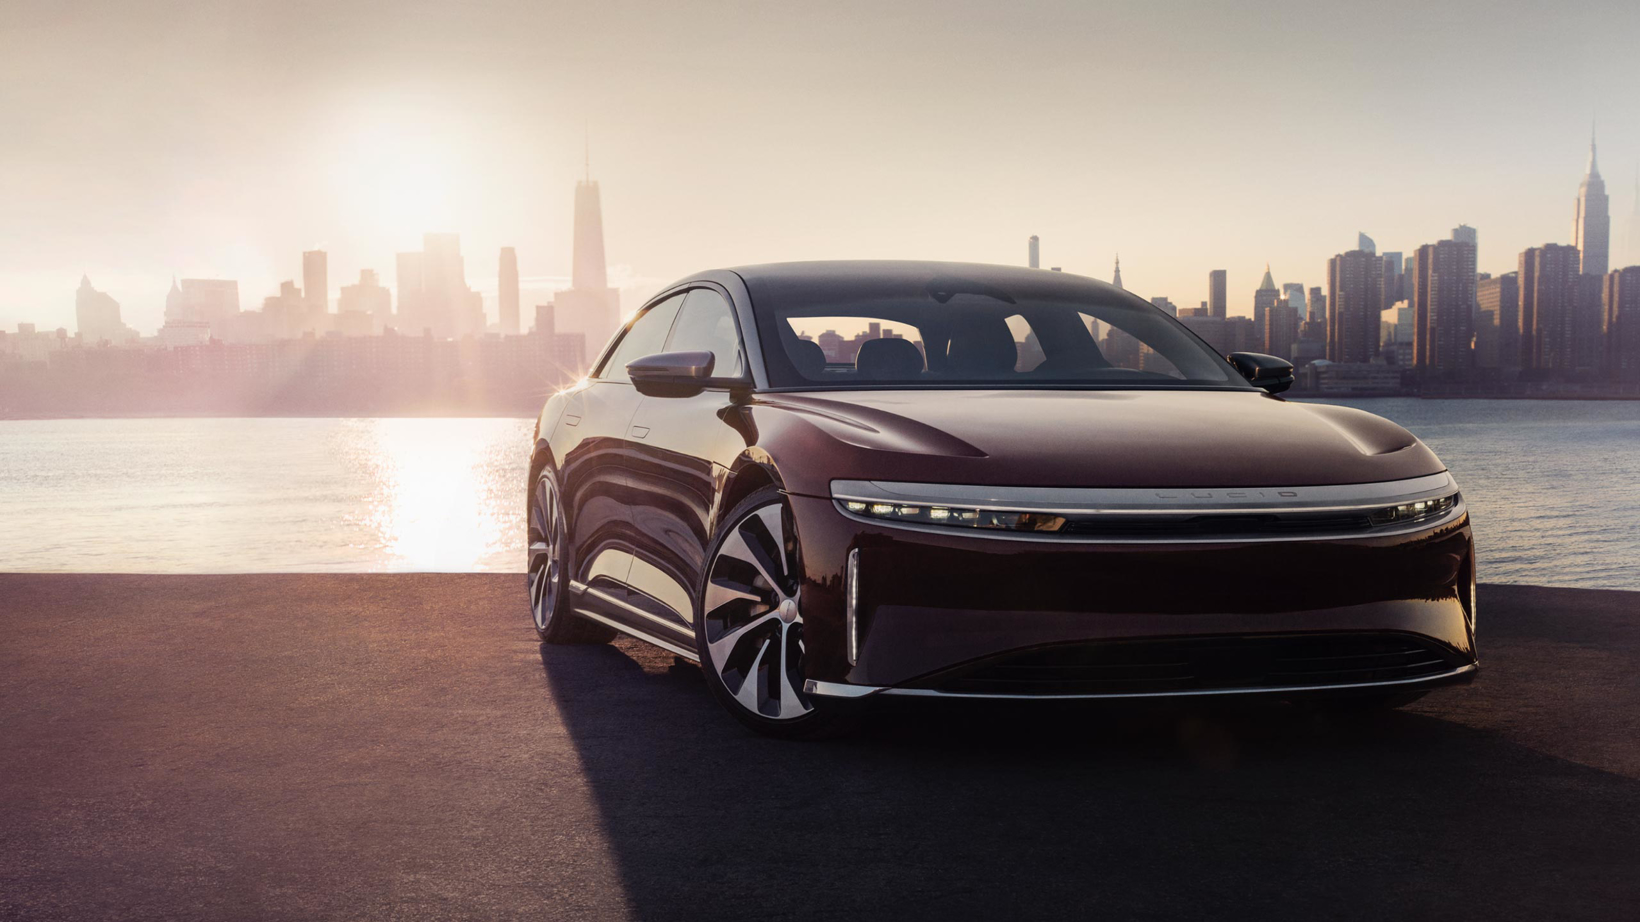 Lucid Air OTA software update fails, rendering the vehicle temporarily undriveable